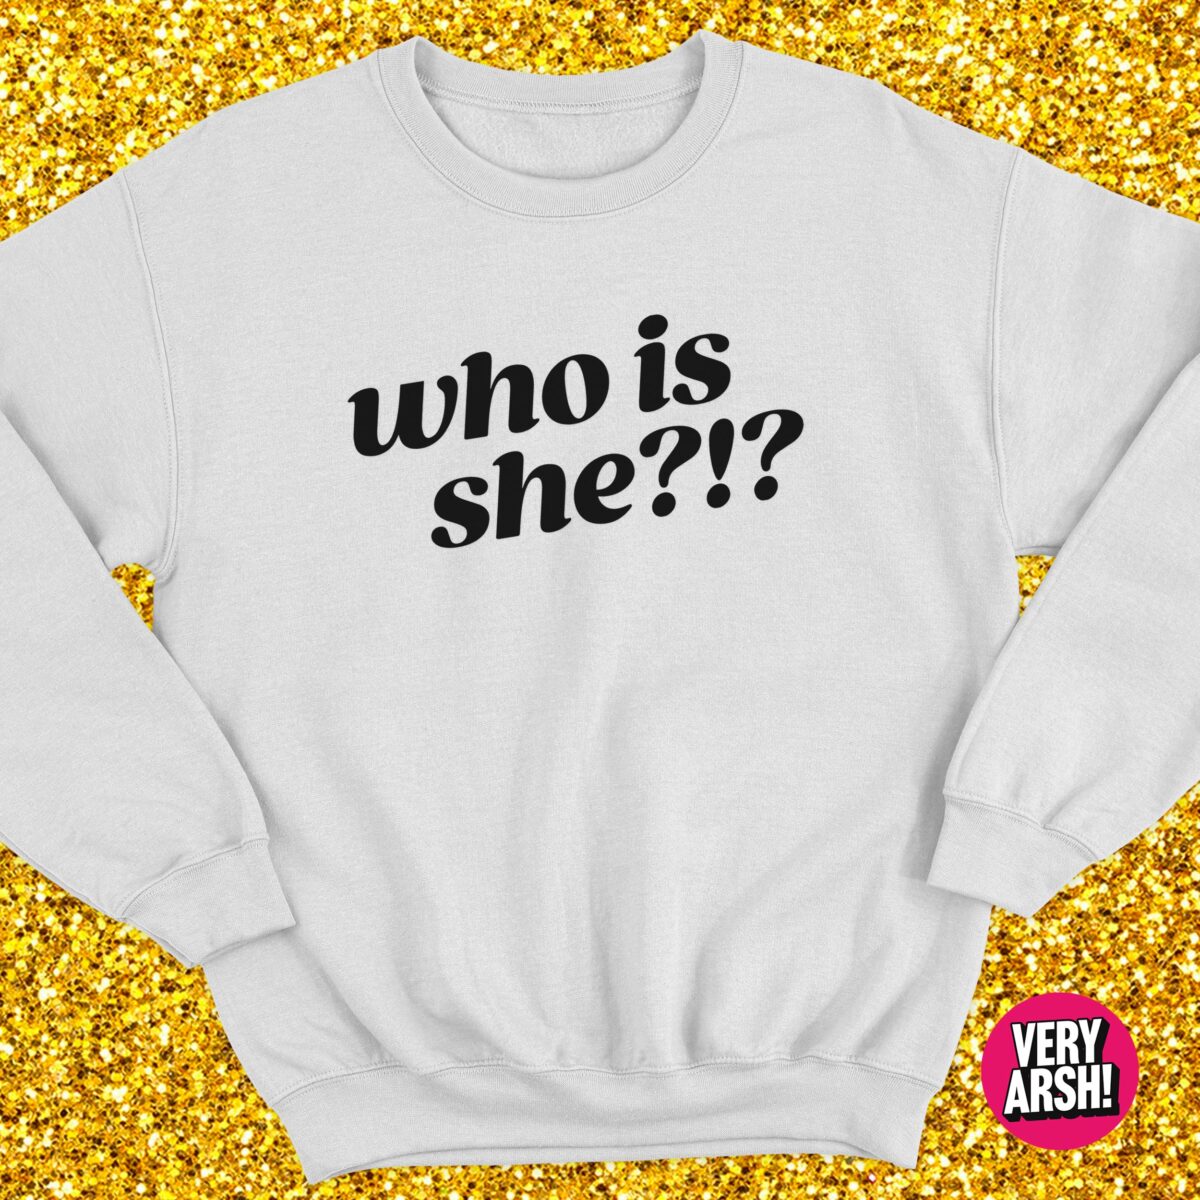 Who Is She?!? Sweater (White) - Inspired by Nikki Grahame from Big Brother